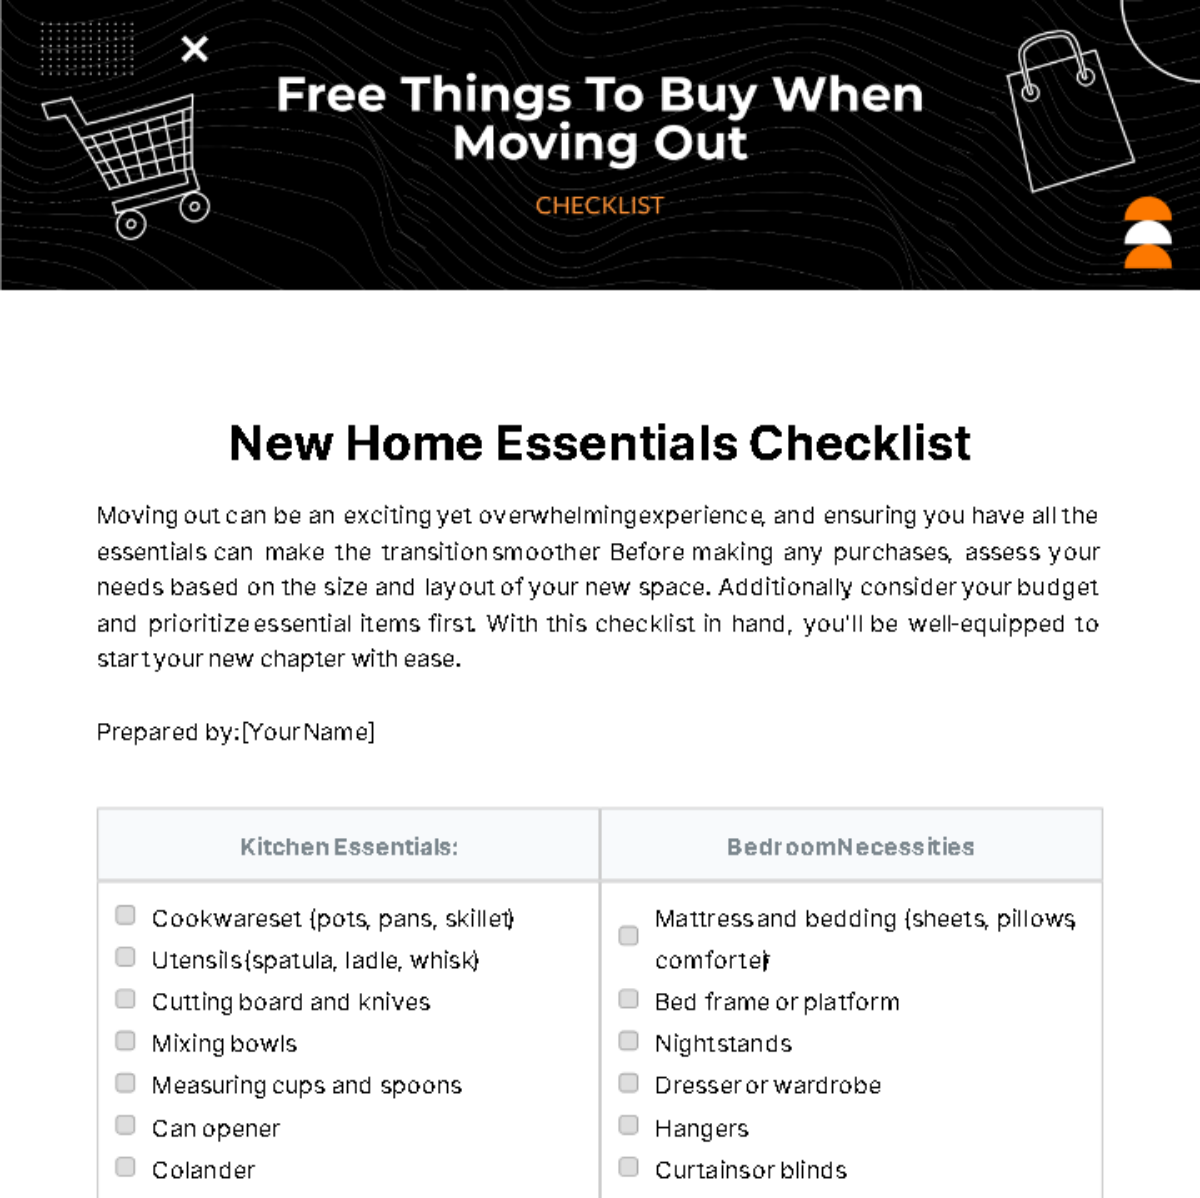 Things To Buy When Moving Out Checklist Template